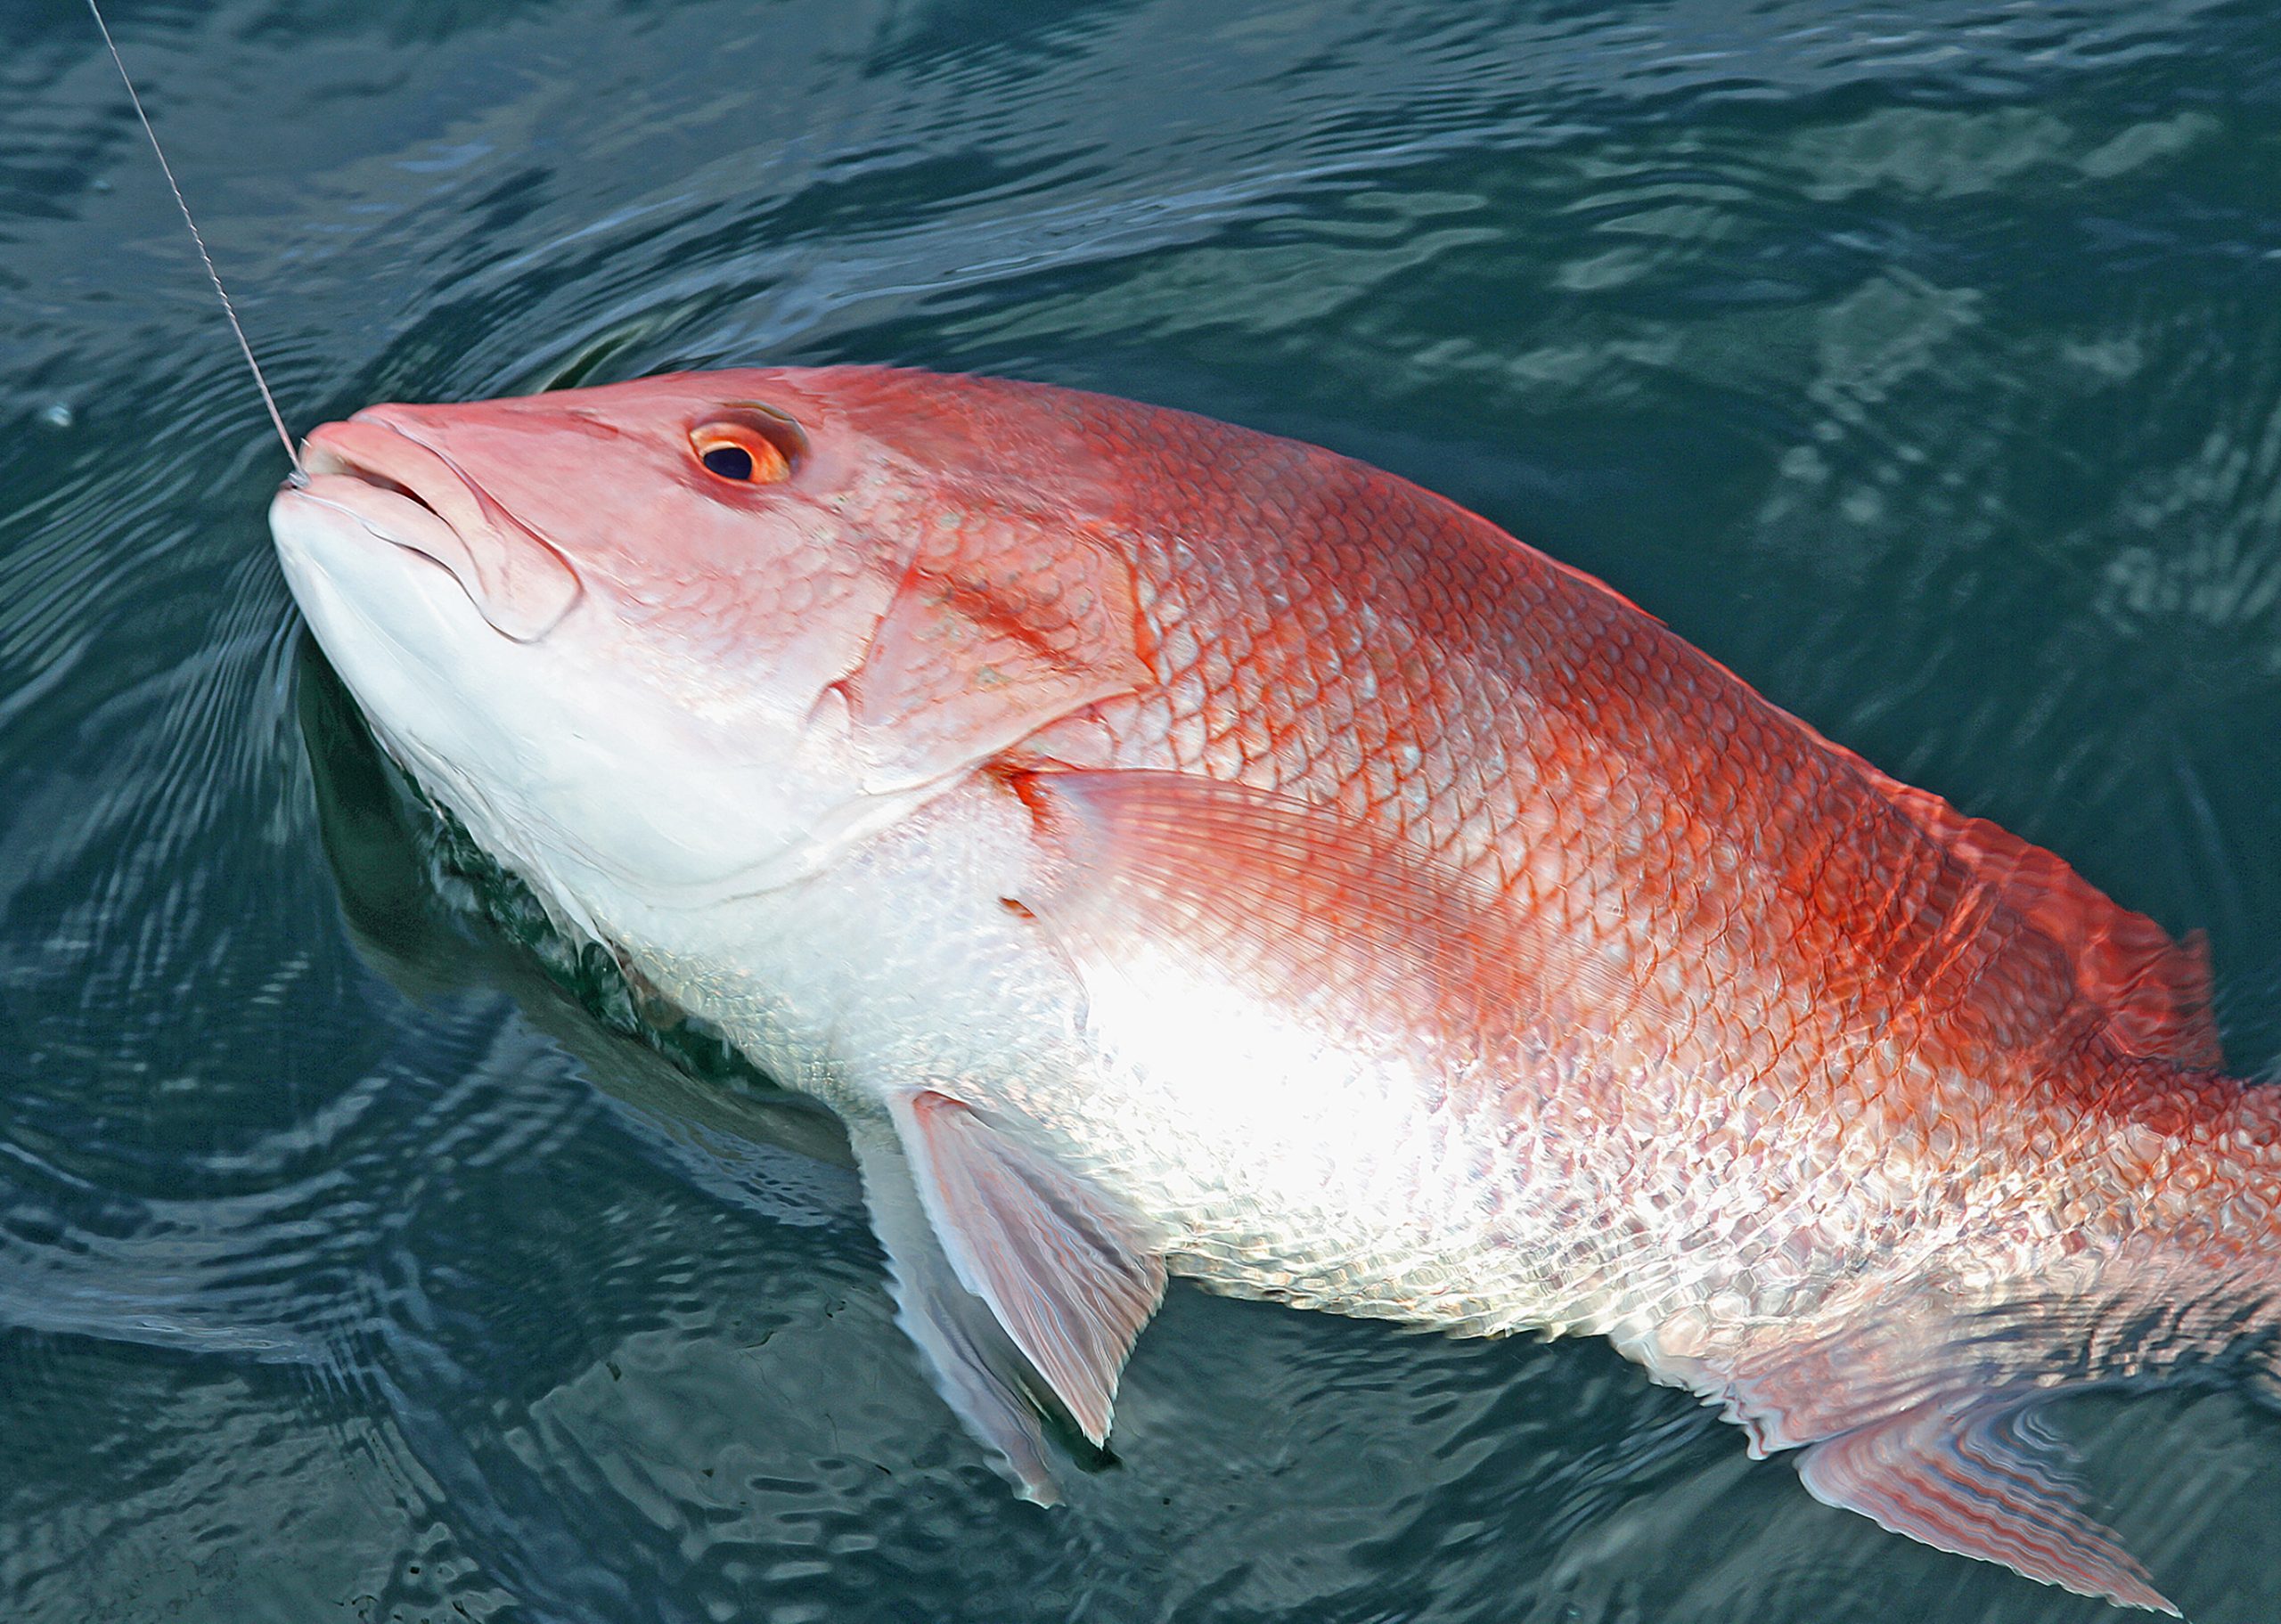 Alabama's private recreational red snapper quota may be cut